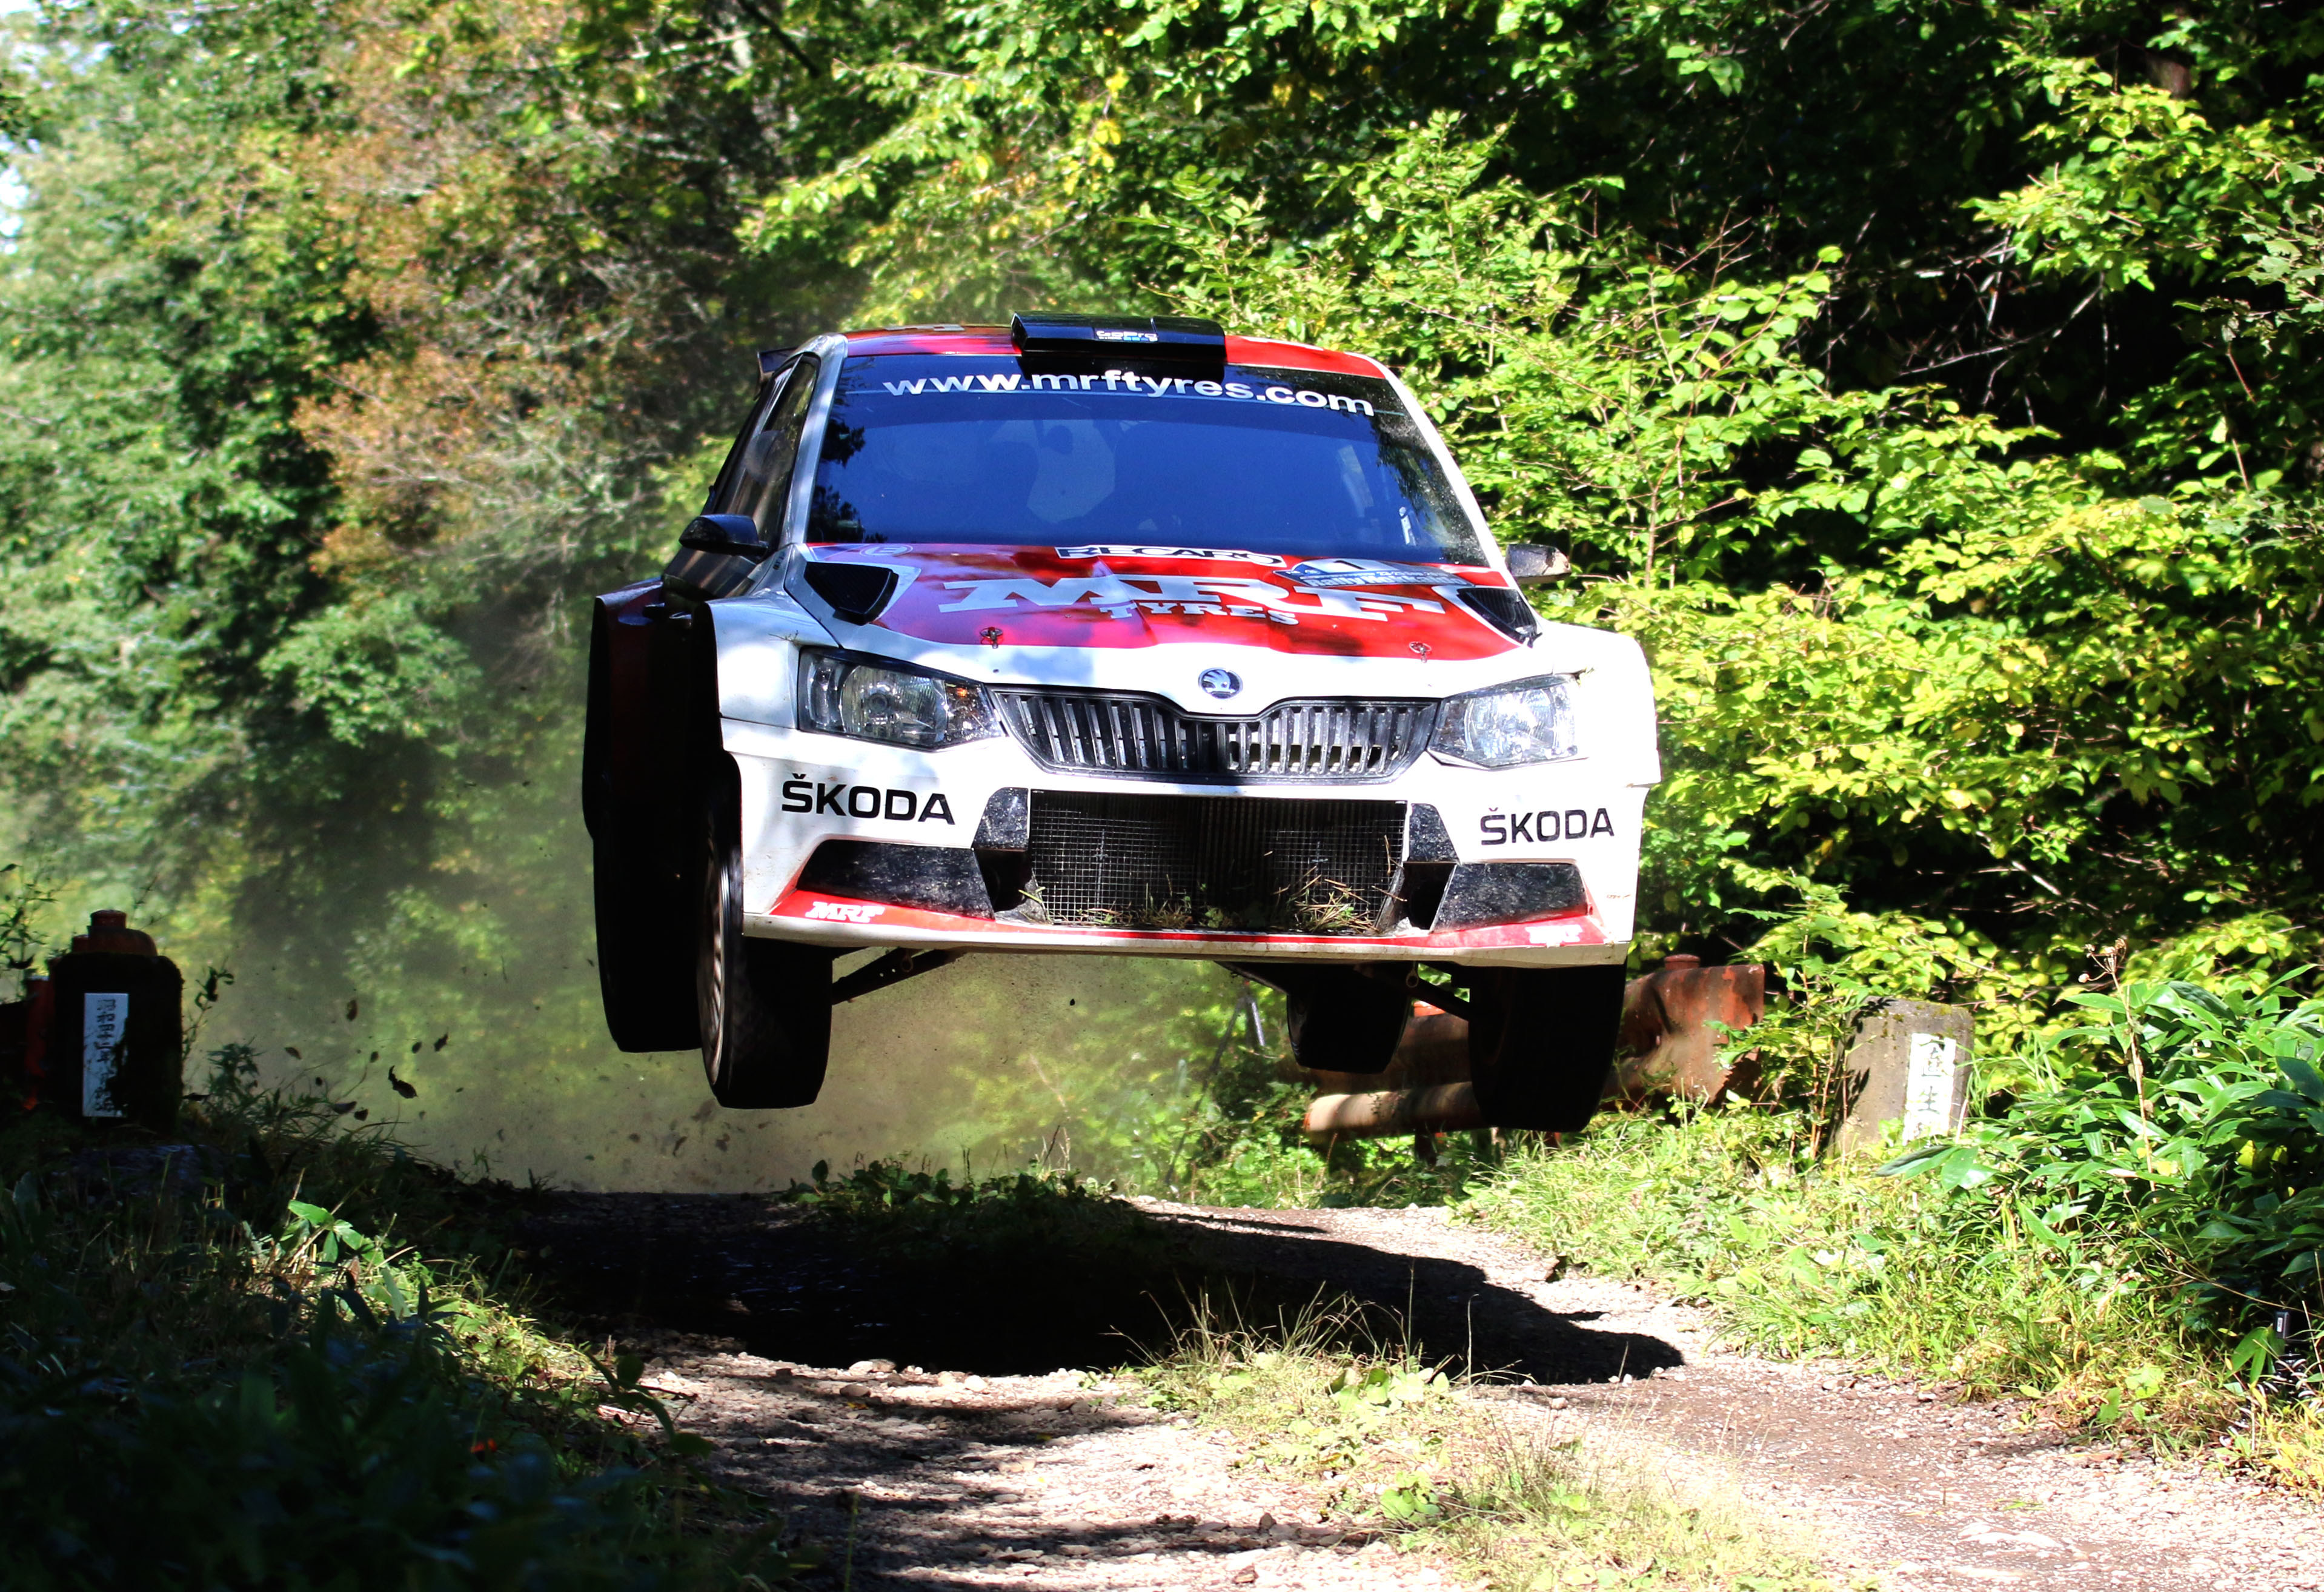 Photo of Outright speed, not the key in Malaysia: APRC